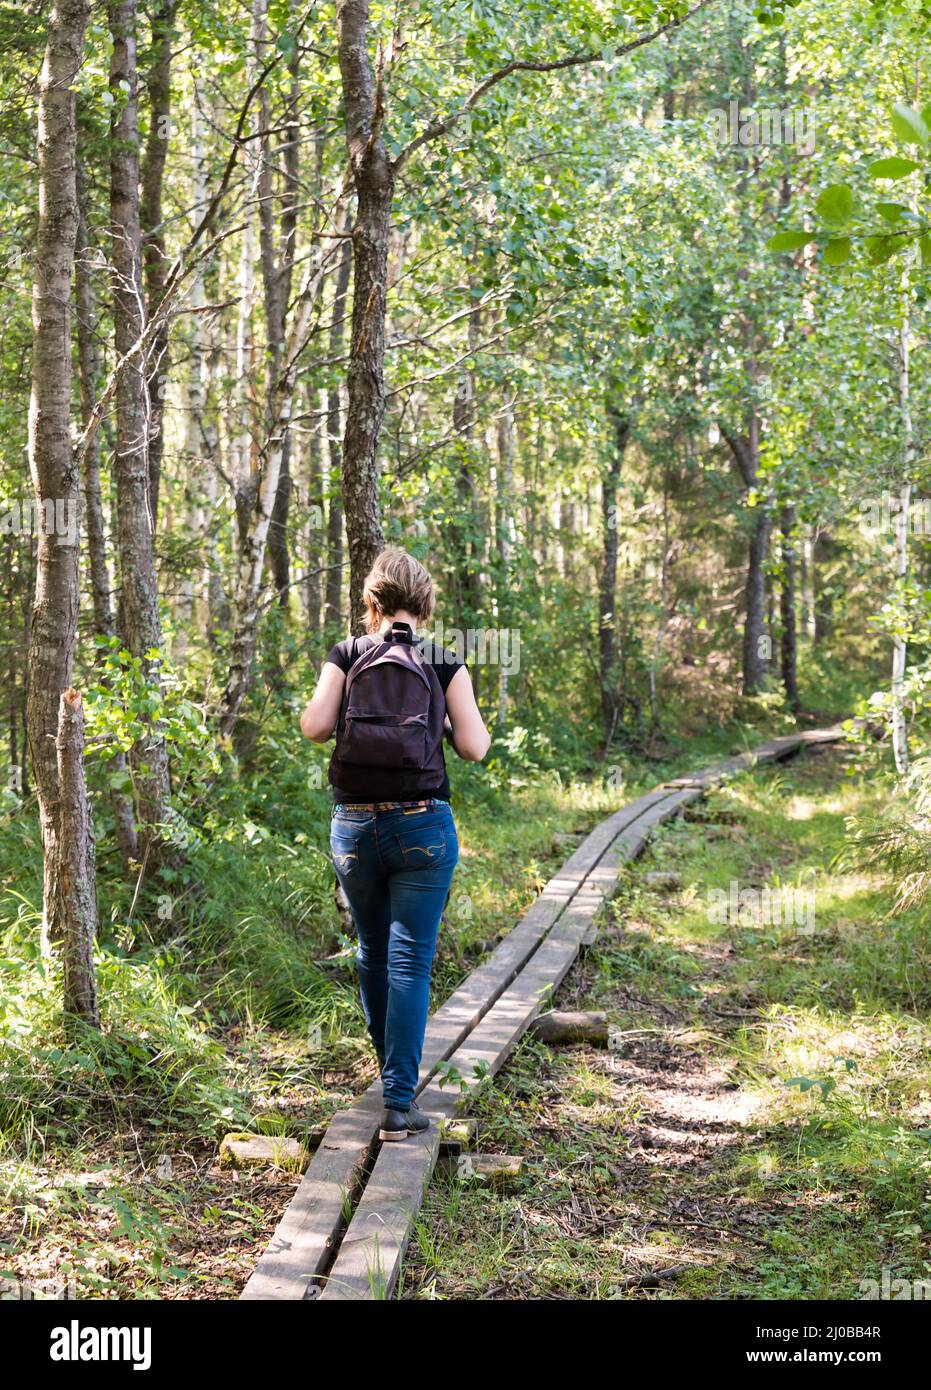 Young healthy woman with backpack walking over a wooden path in the Florarna Naturreservat , a Swedish Nature Reserve Park Stock Photo